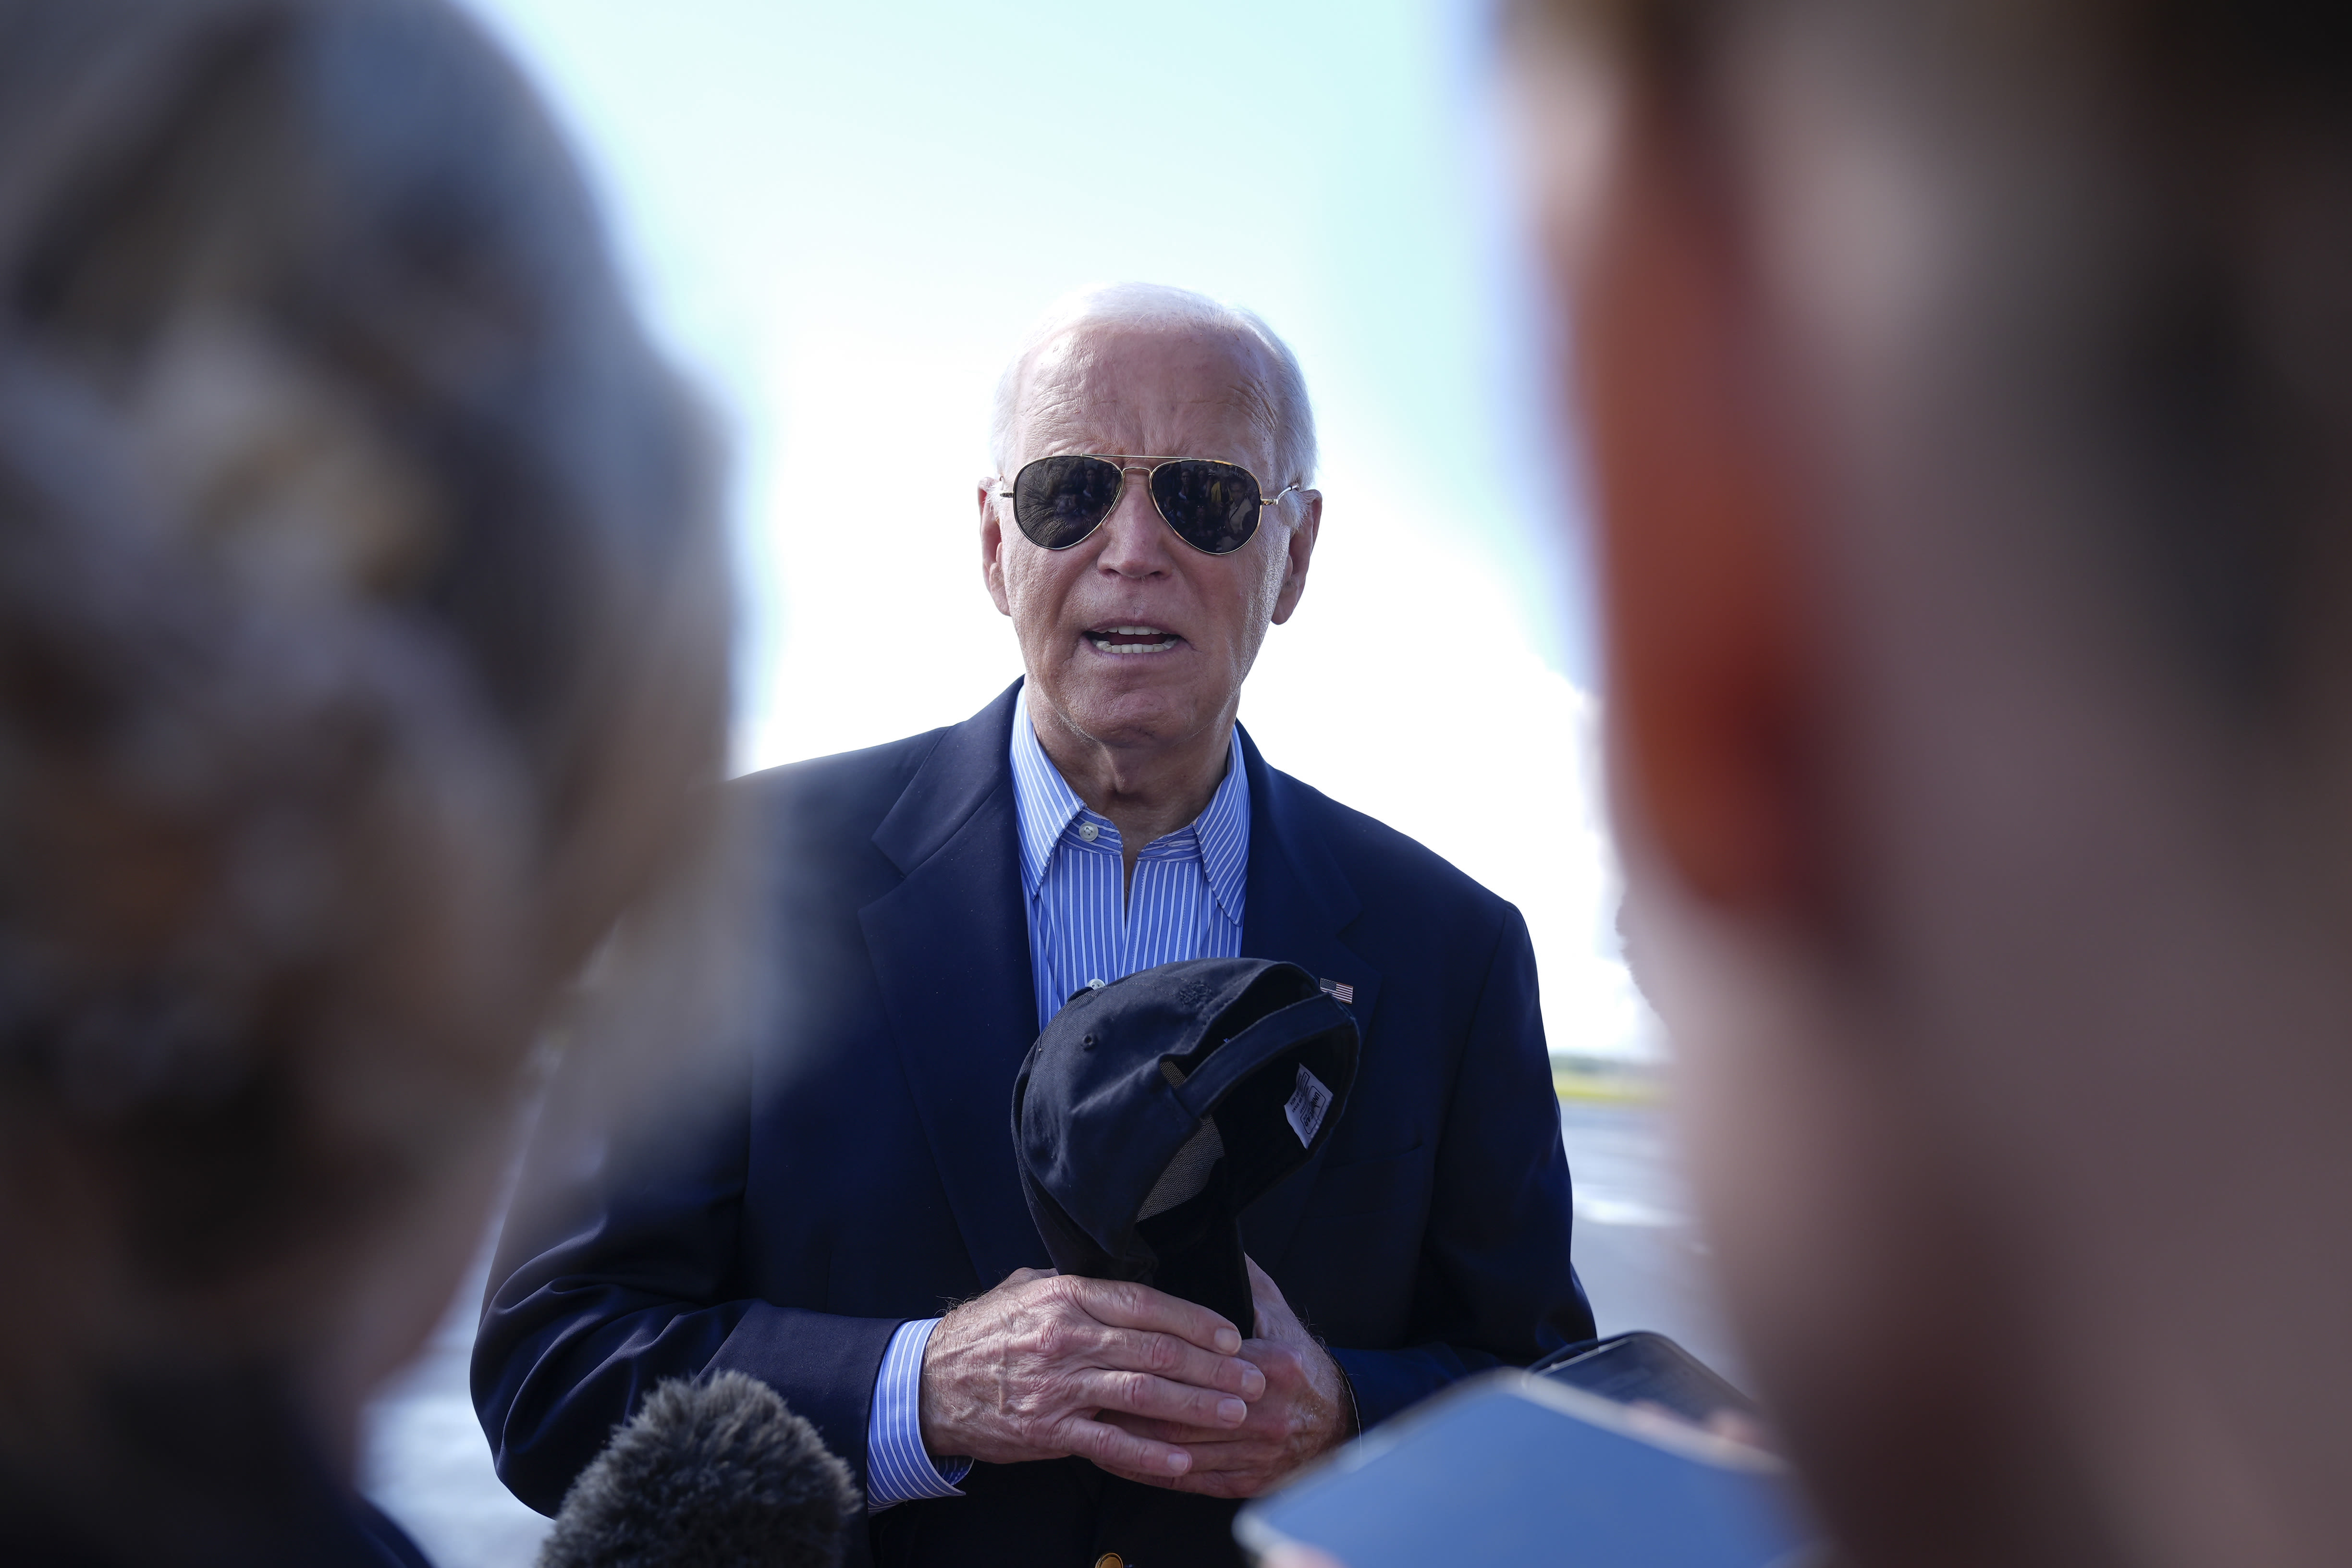 4 factors that will determine whether Biden drops out of the 2024 race